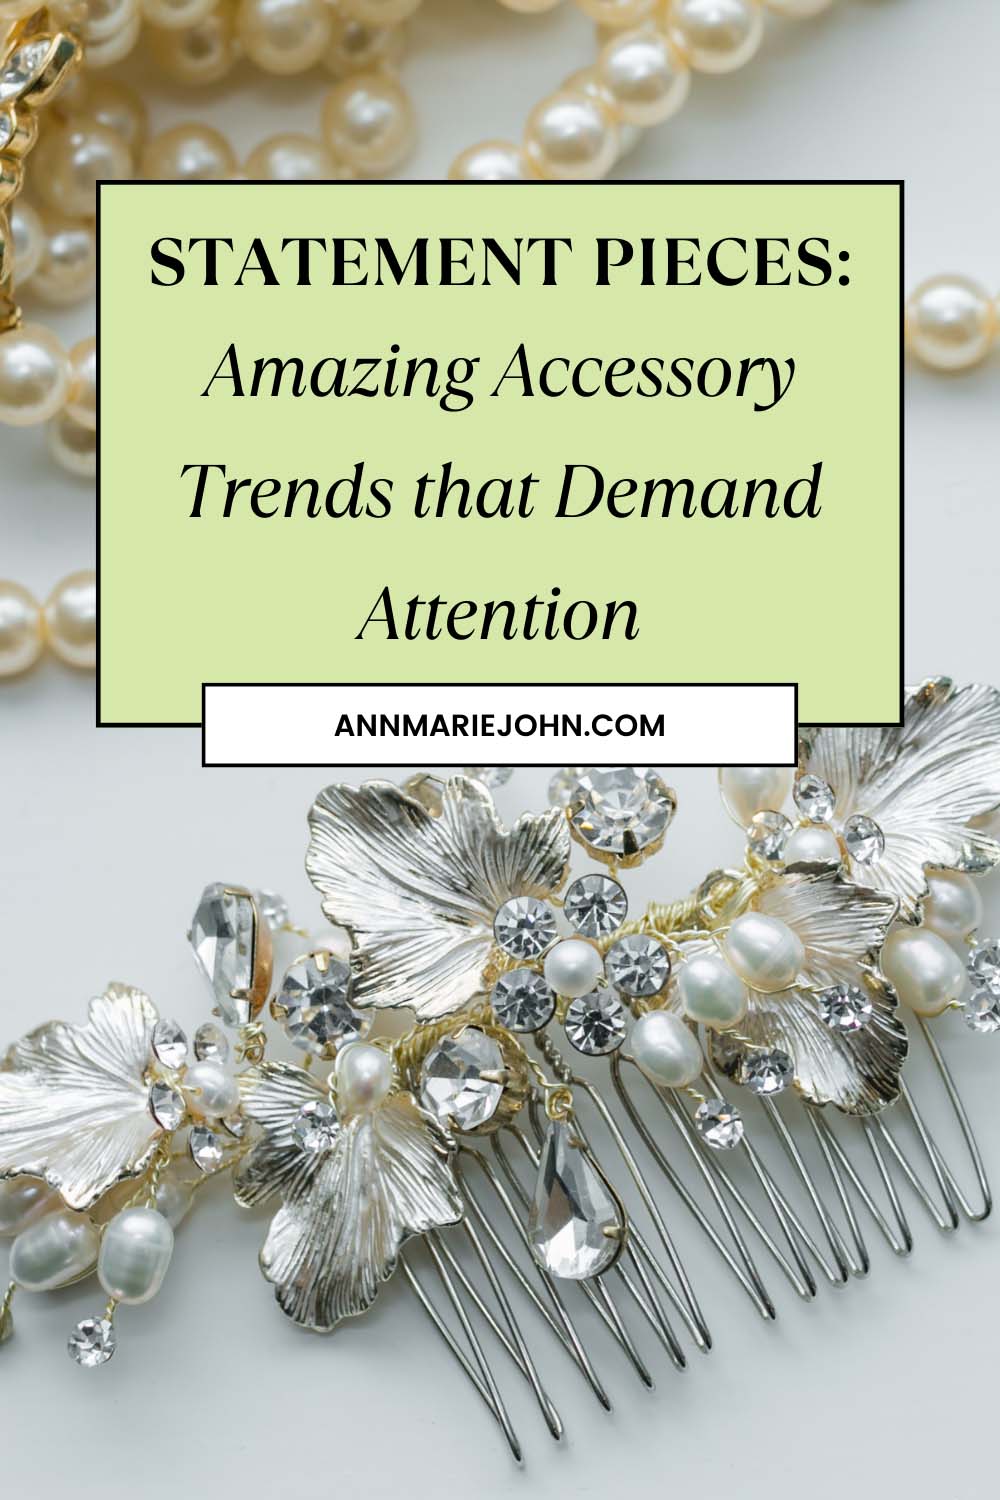 Statement Pieces: Amazing Accessory Trends that Demand Attention